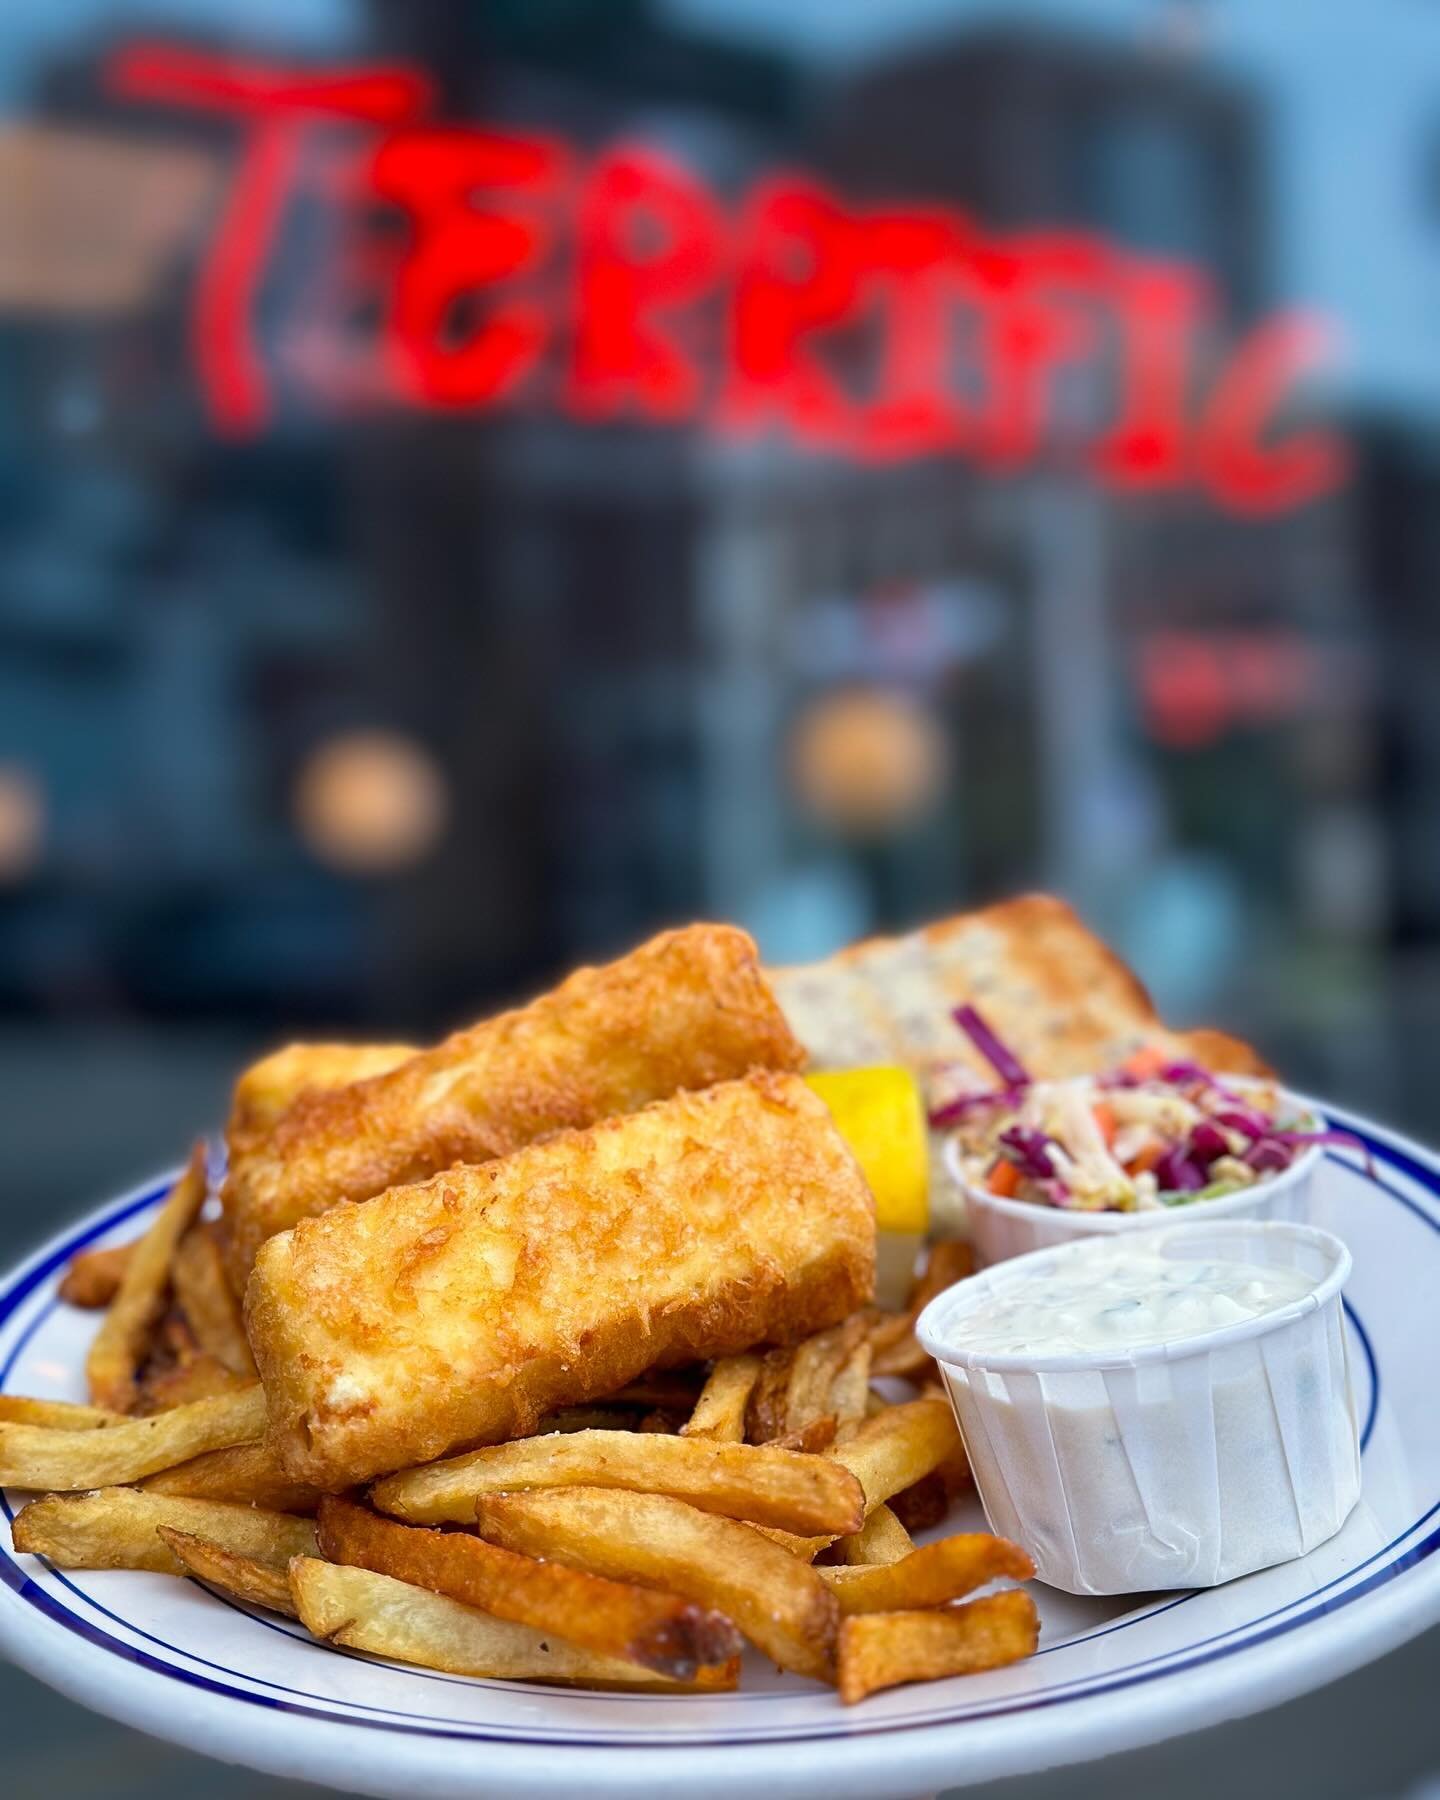 Wisconsin Fish Fries are terrific. 
You know what else is terrific? Allowing everyone in on the fun. 

Presenting a fresh twist on our Vegan Fish Fry, featuring a new super tasty brine, by our very own @the.carsonist! 

What goes in it? VEGAN STUFF l